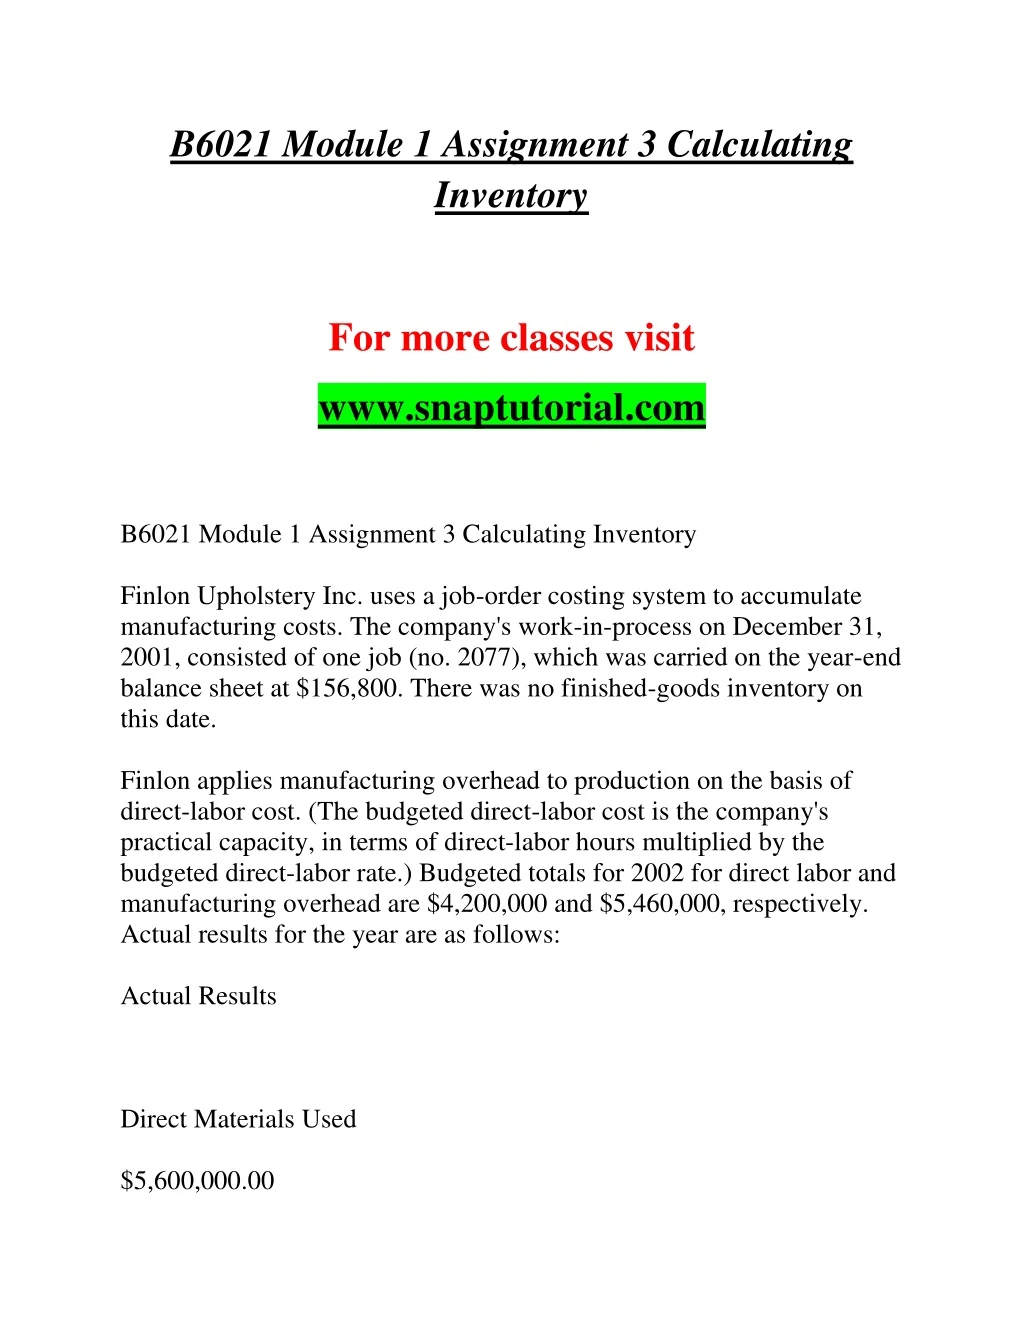 b6021 module 1 assignment 3 calculating inventory